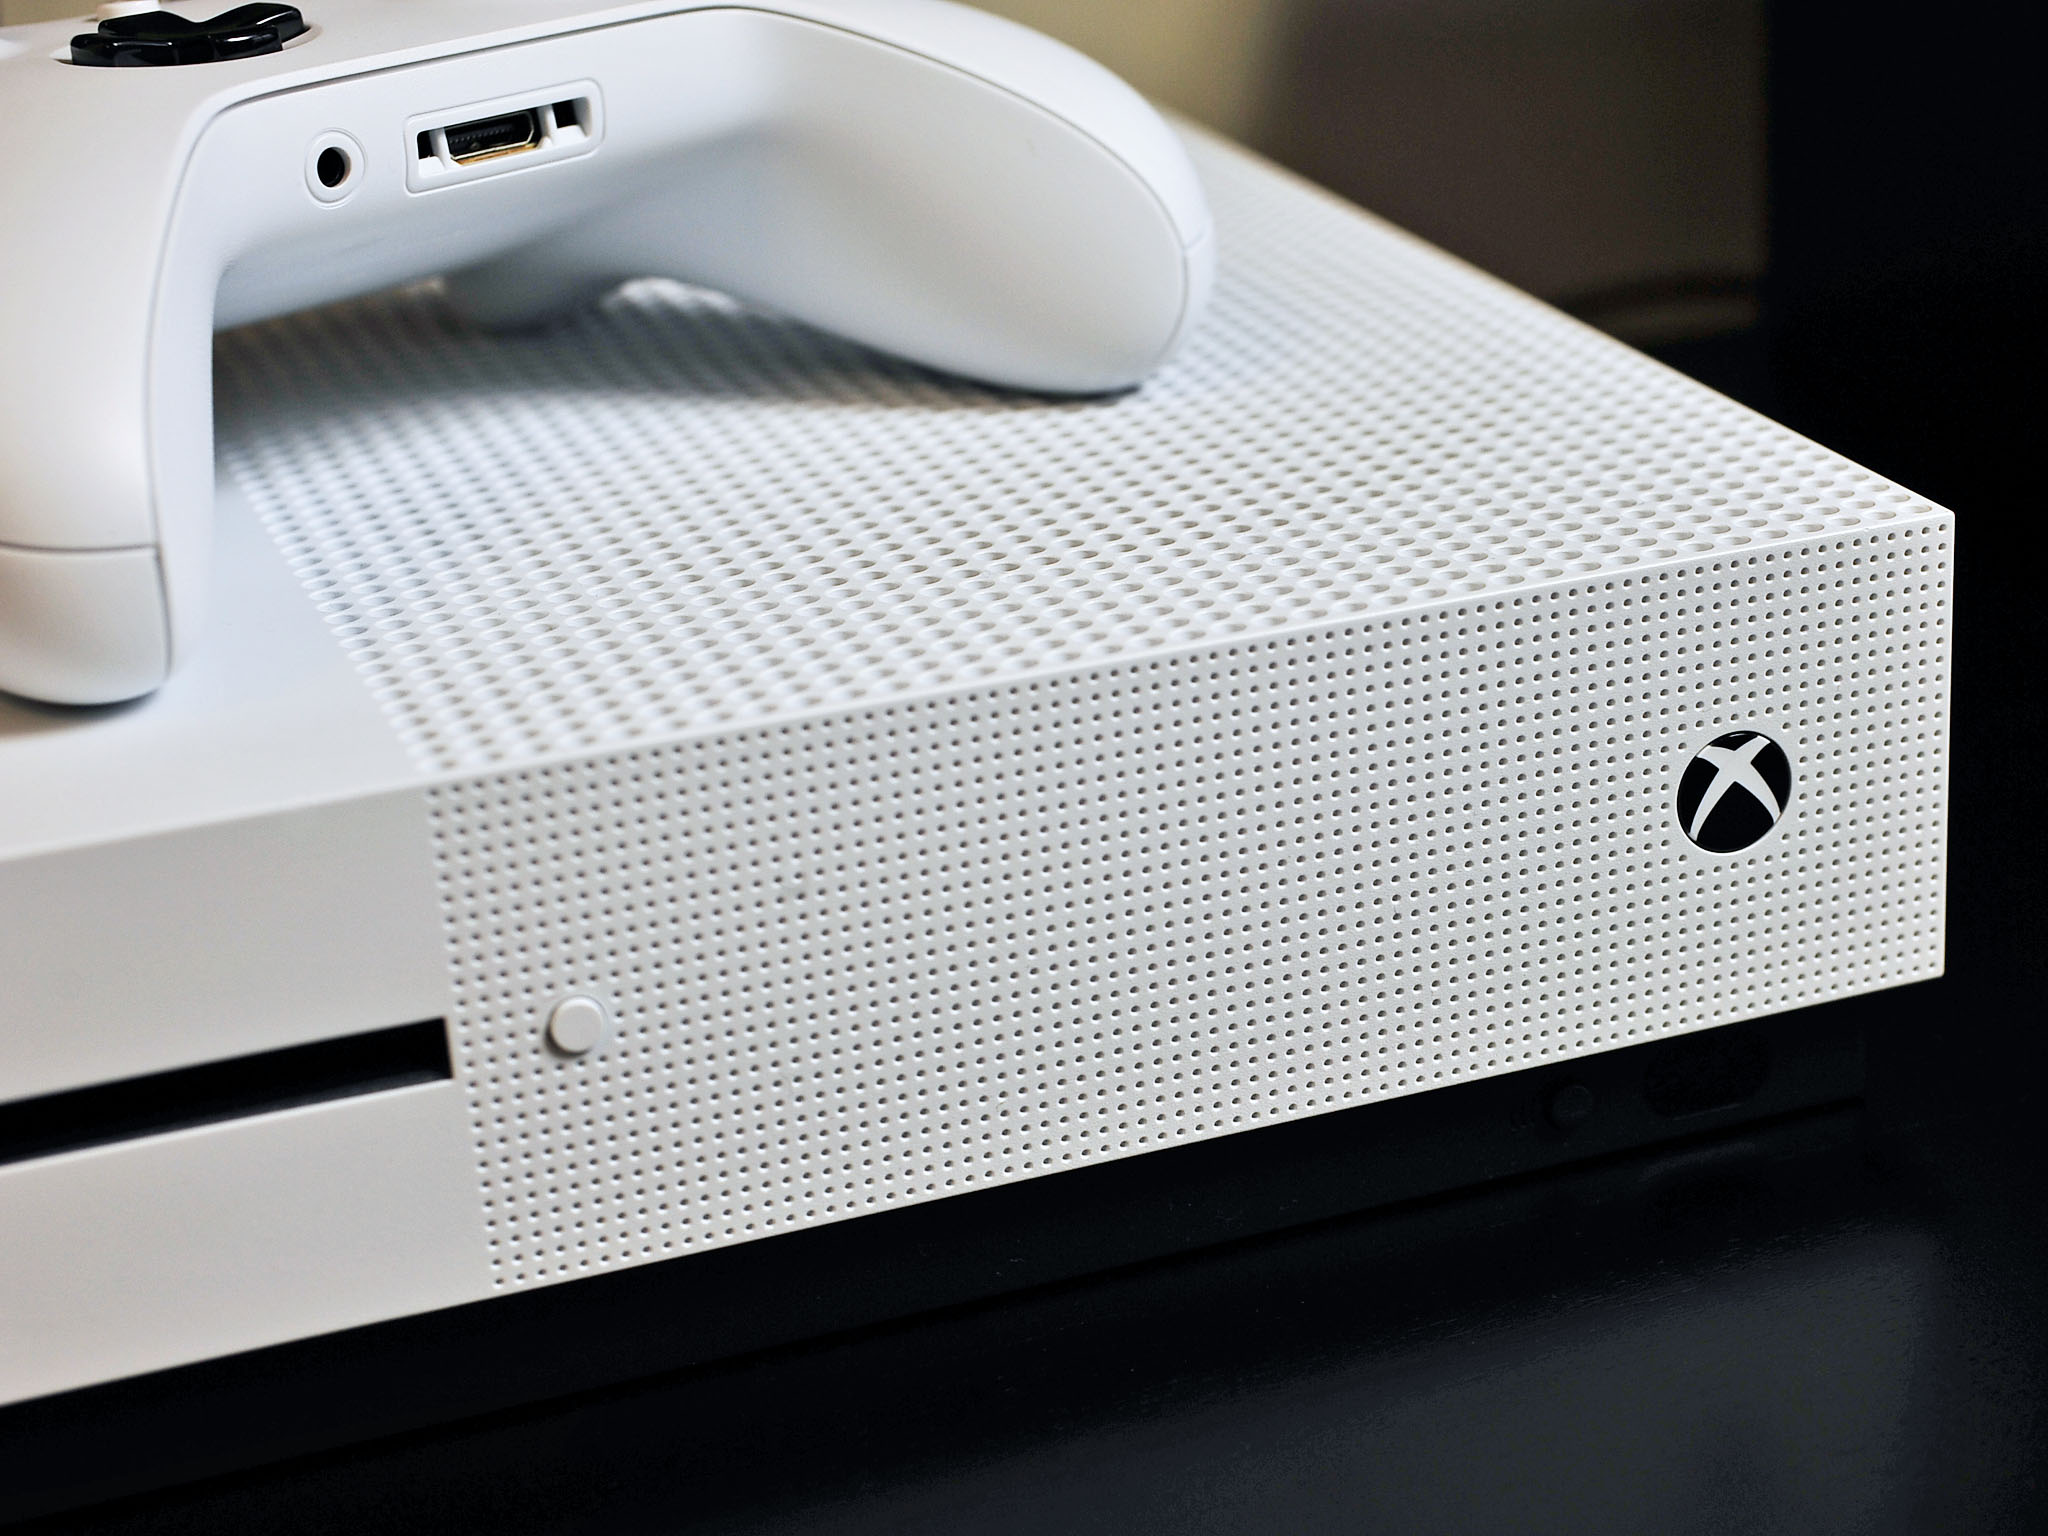 How to Change Your Gamertag on an Xbox One in a Few Simple